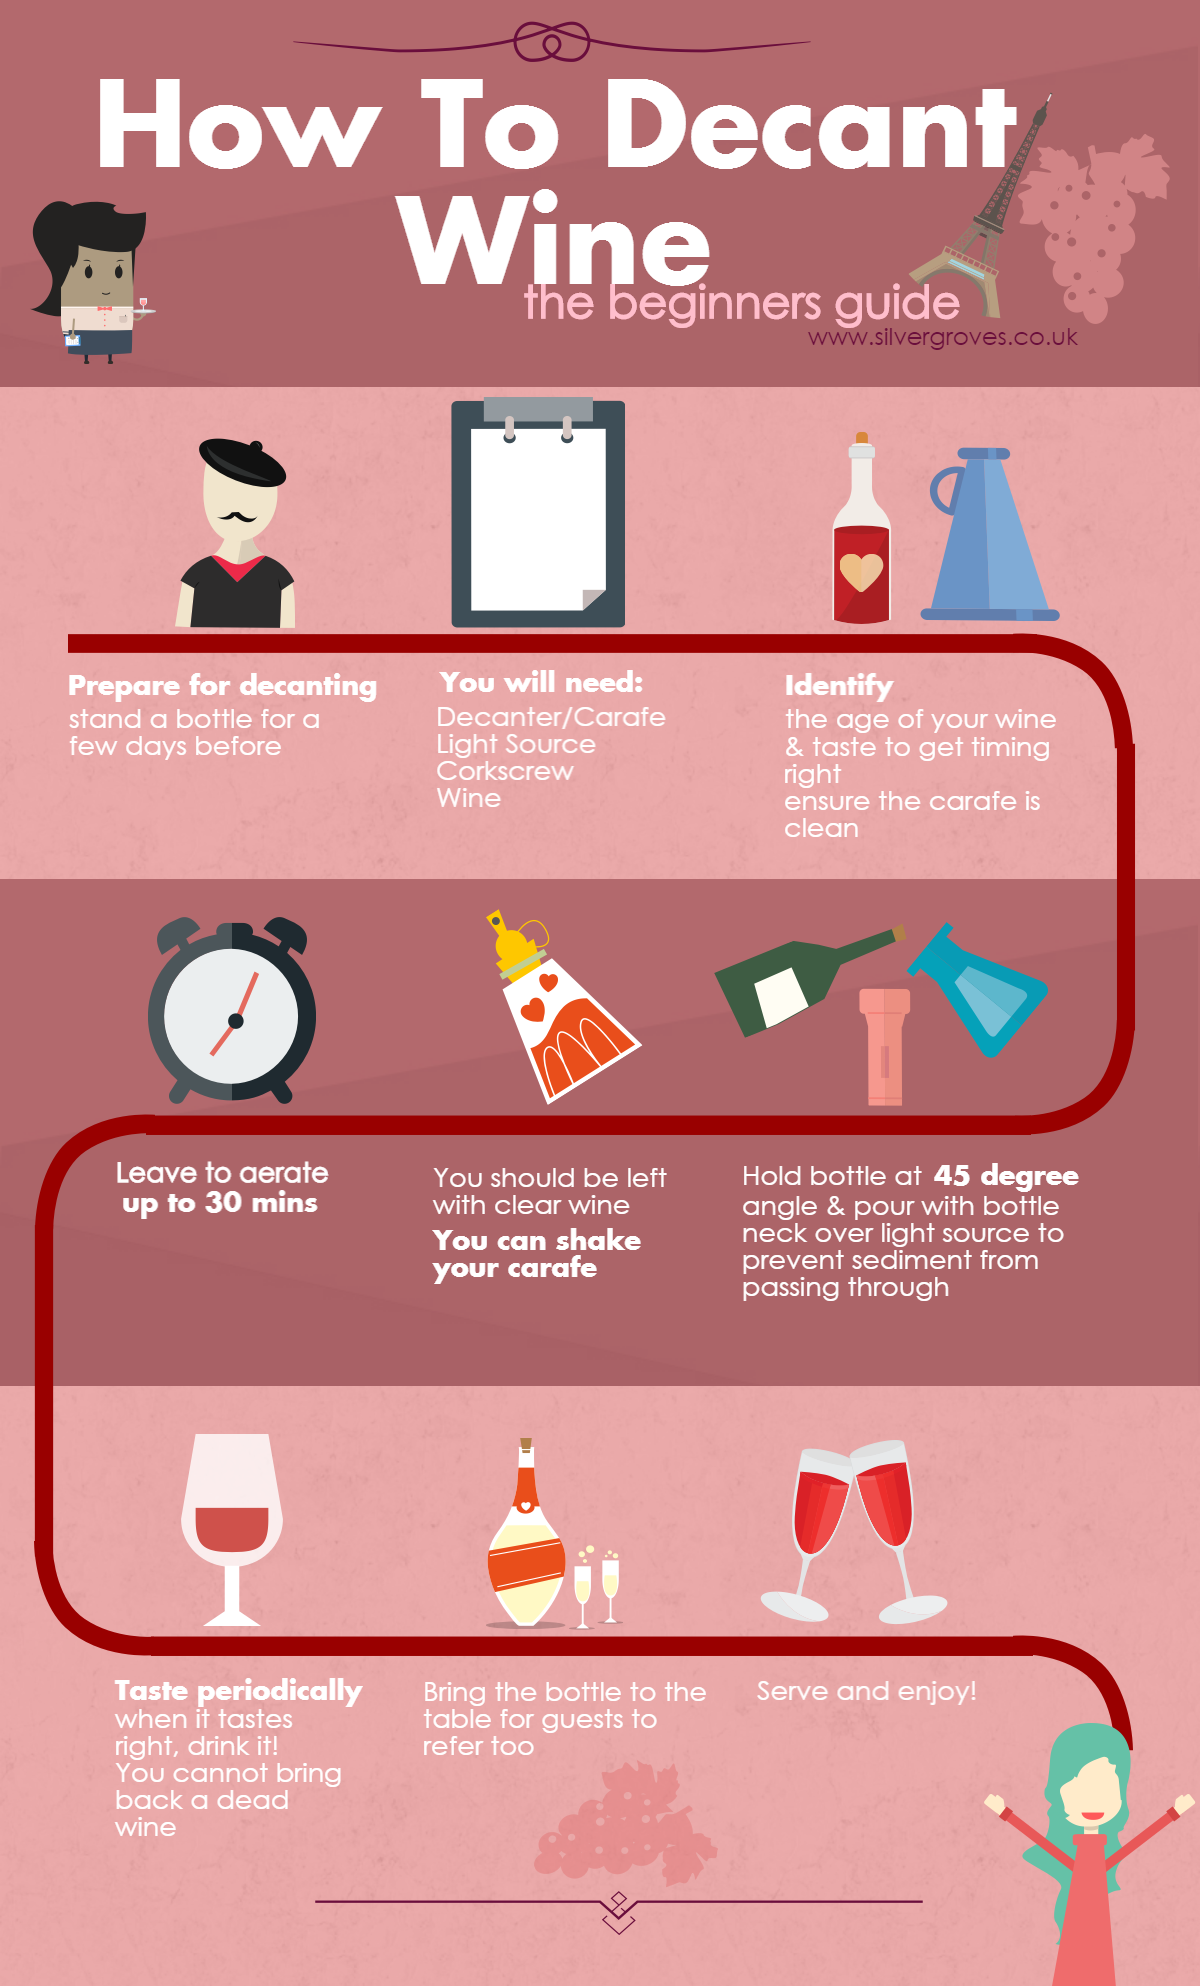 How to Decant wine The Beginners Guide